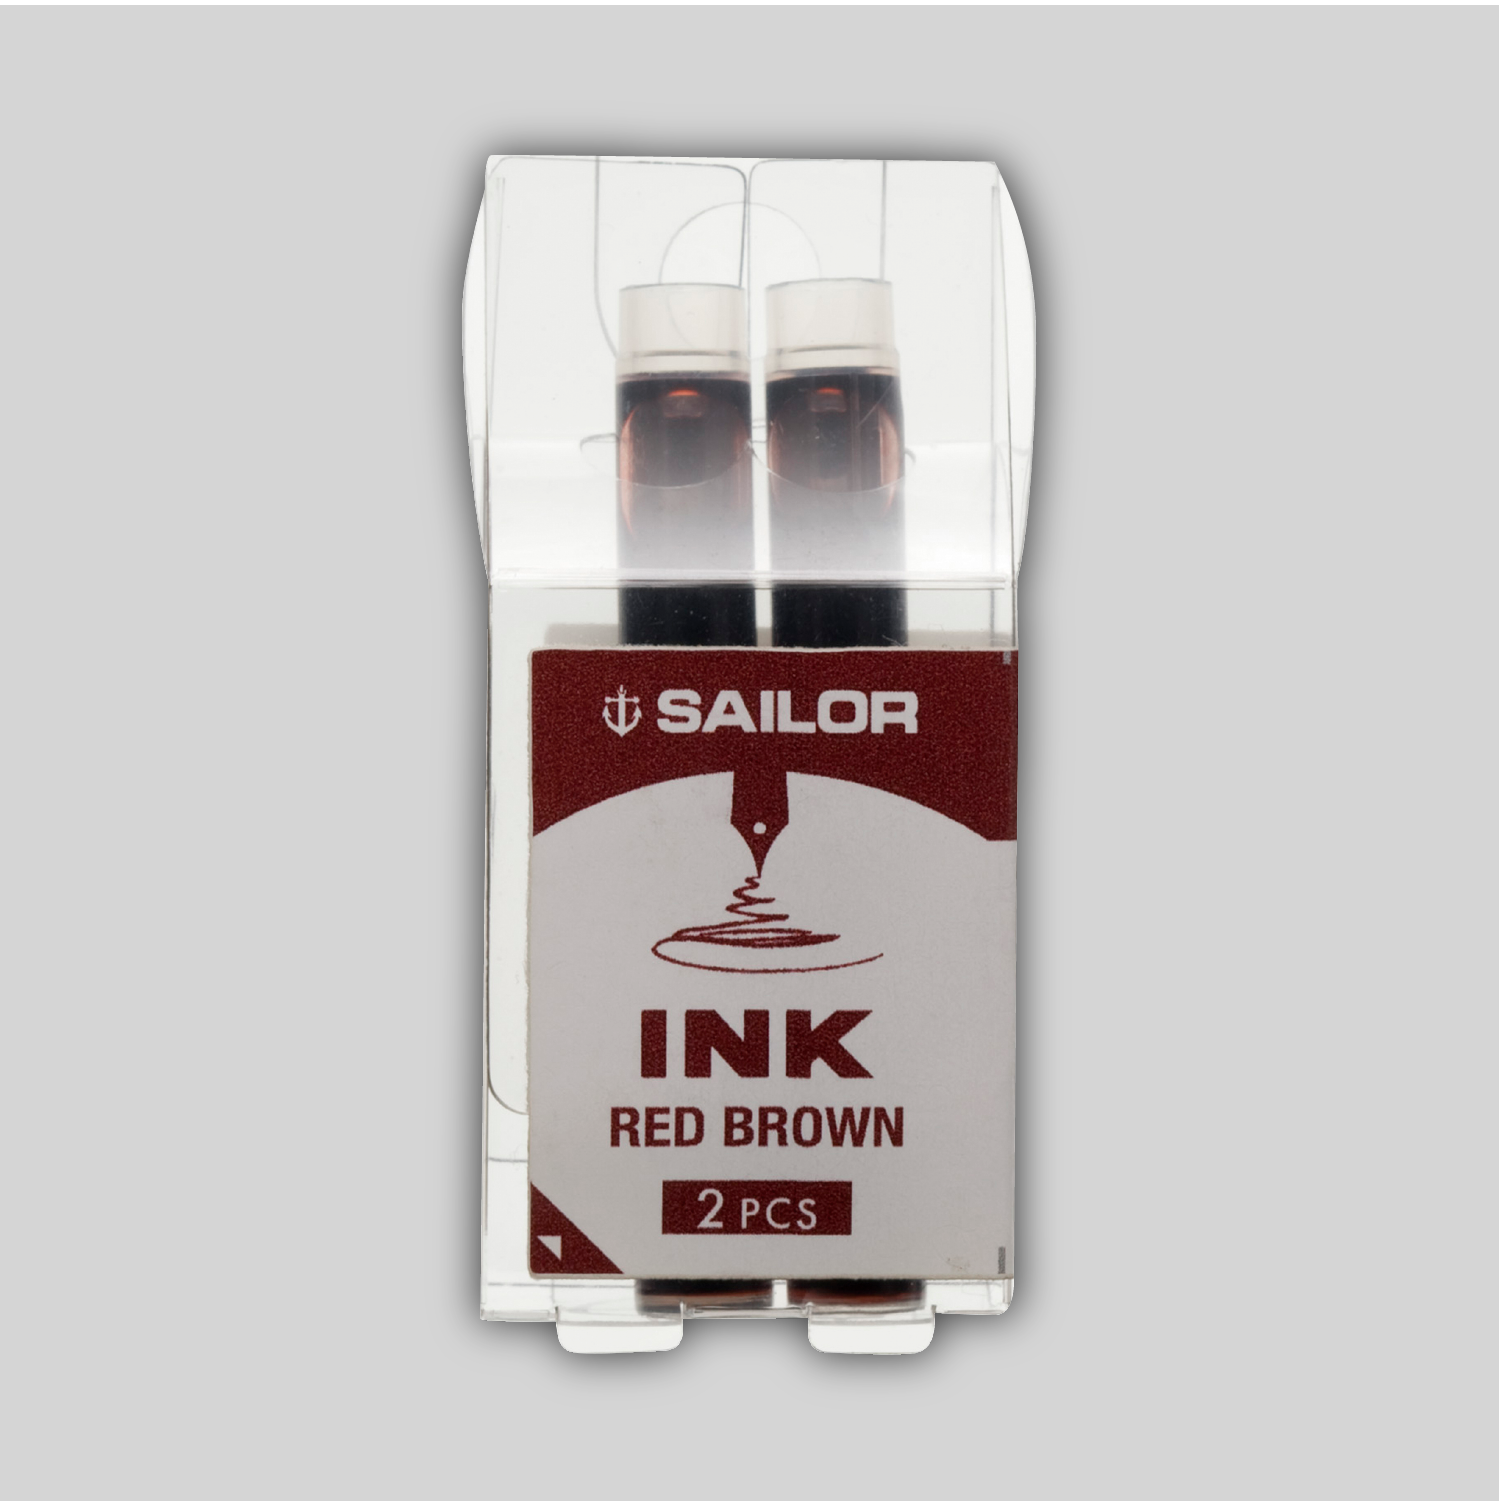 Two red brown ink cartridges in a package.